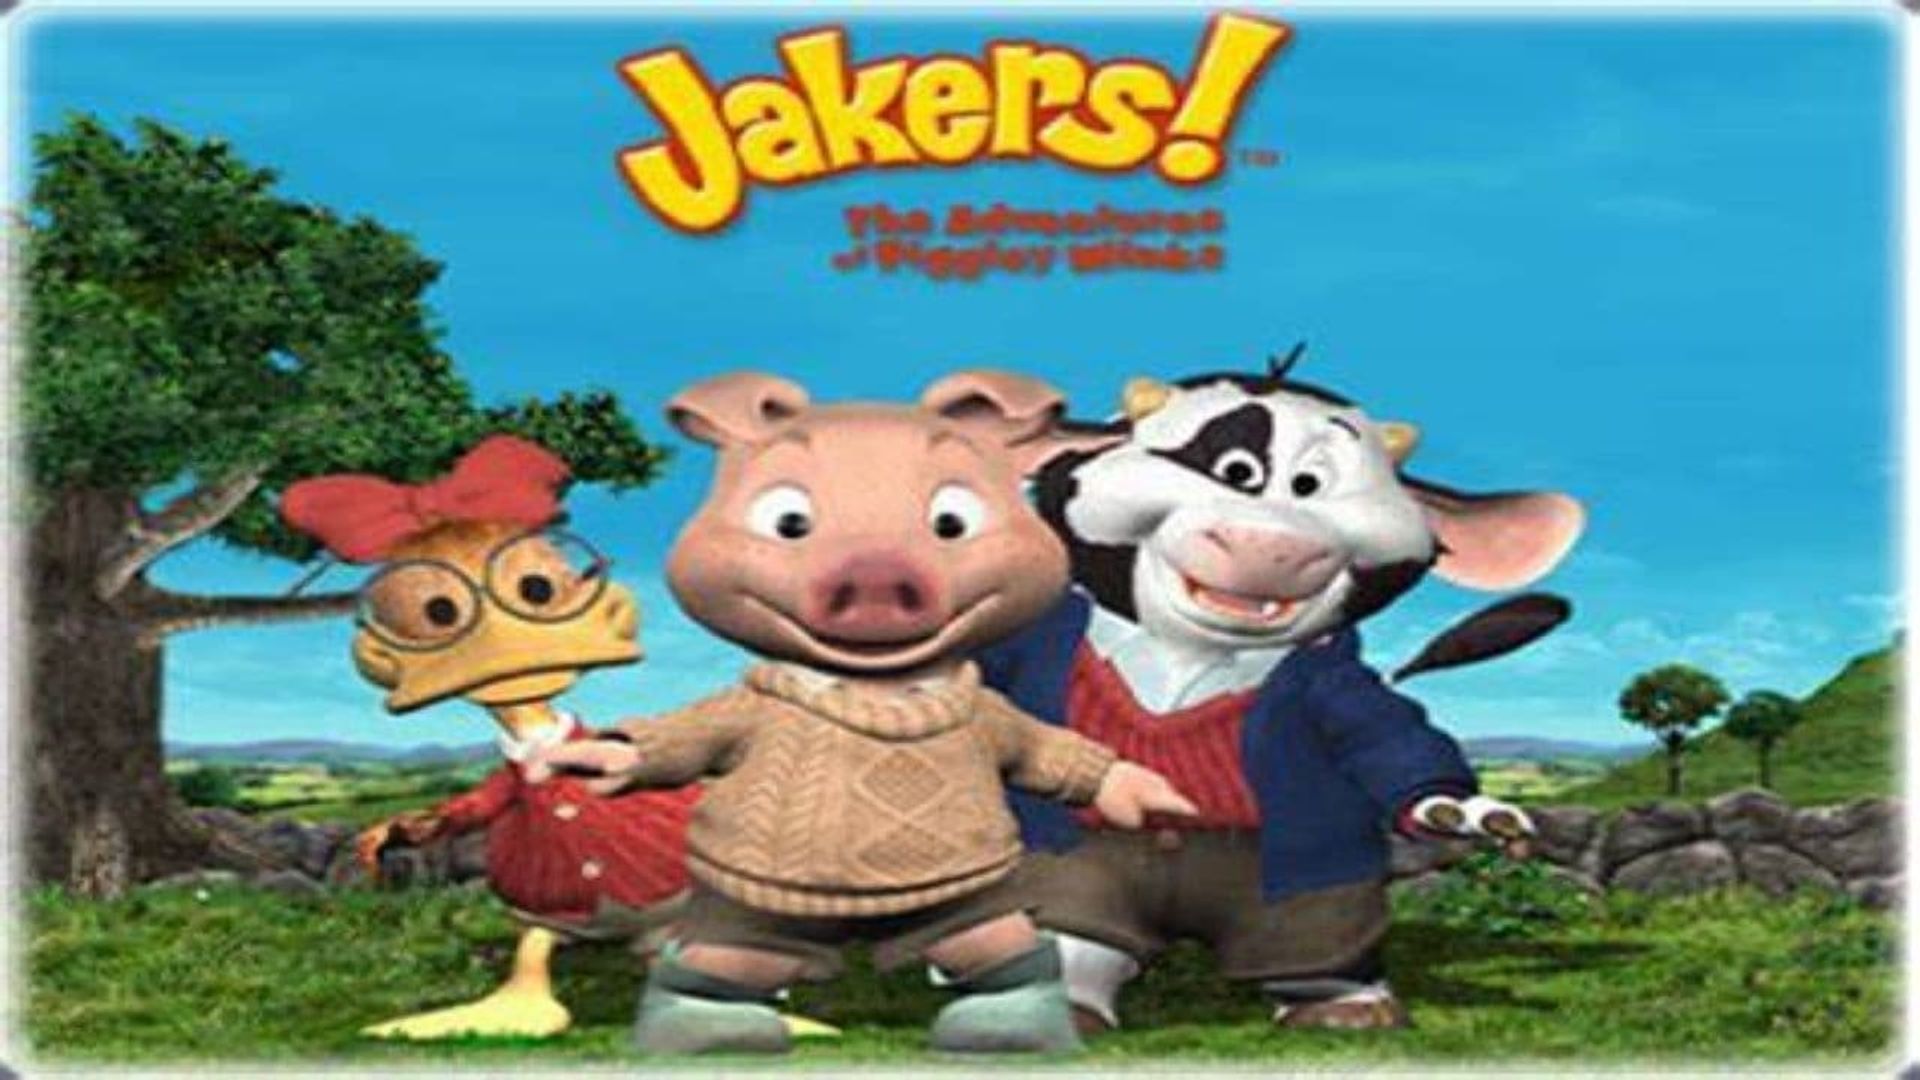 Jakers! The Adventures of Piggley Winks background